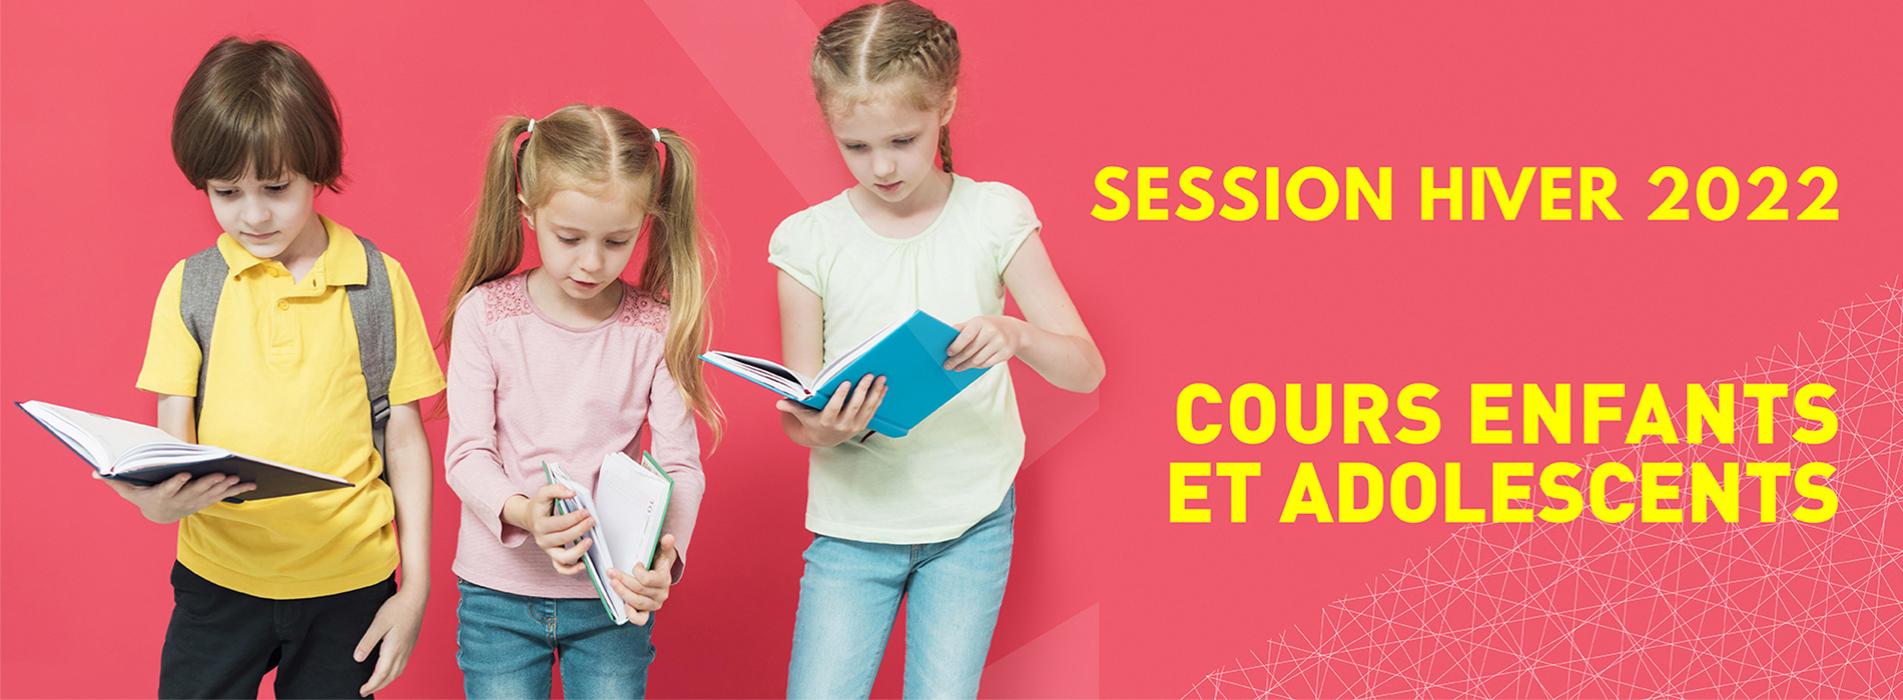  Hiver 2022 - Session Hiver - Scolaires (2)